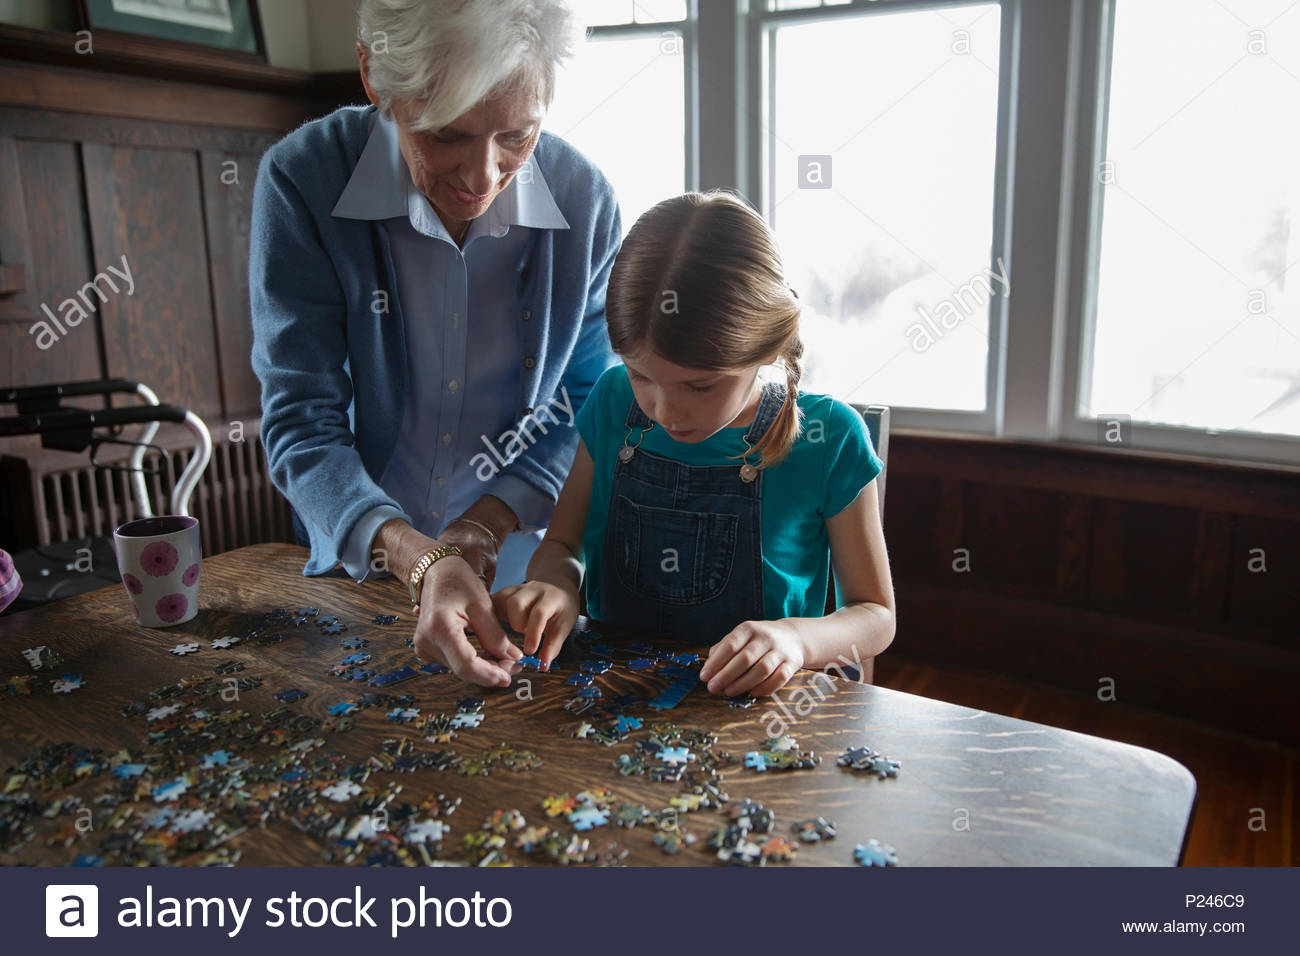 Grandmother and granddaughter assembling jigsaw puzzle Stock Photo